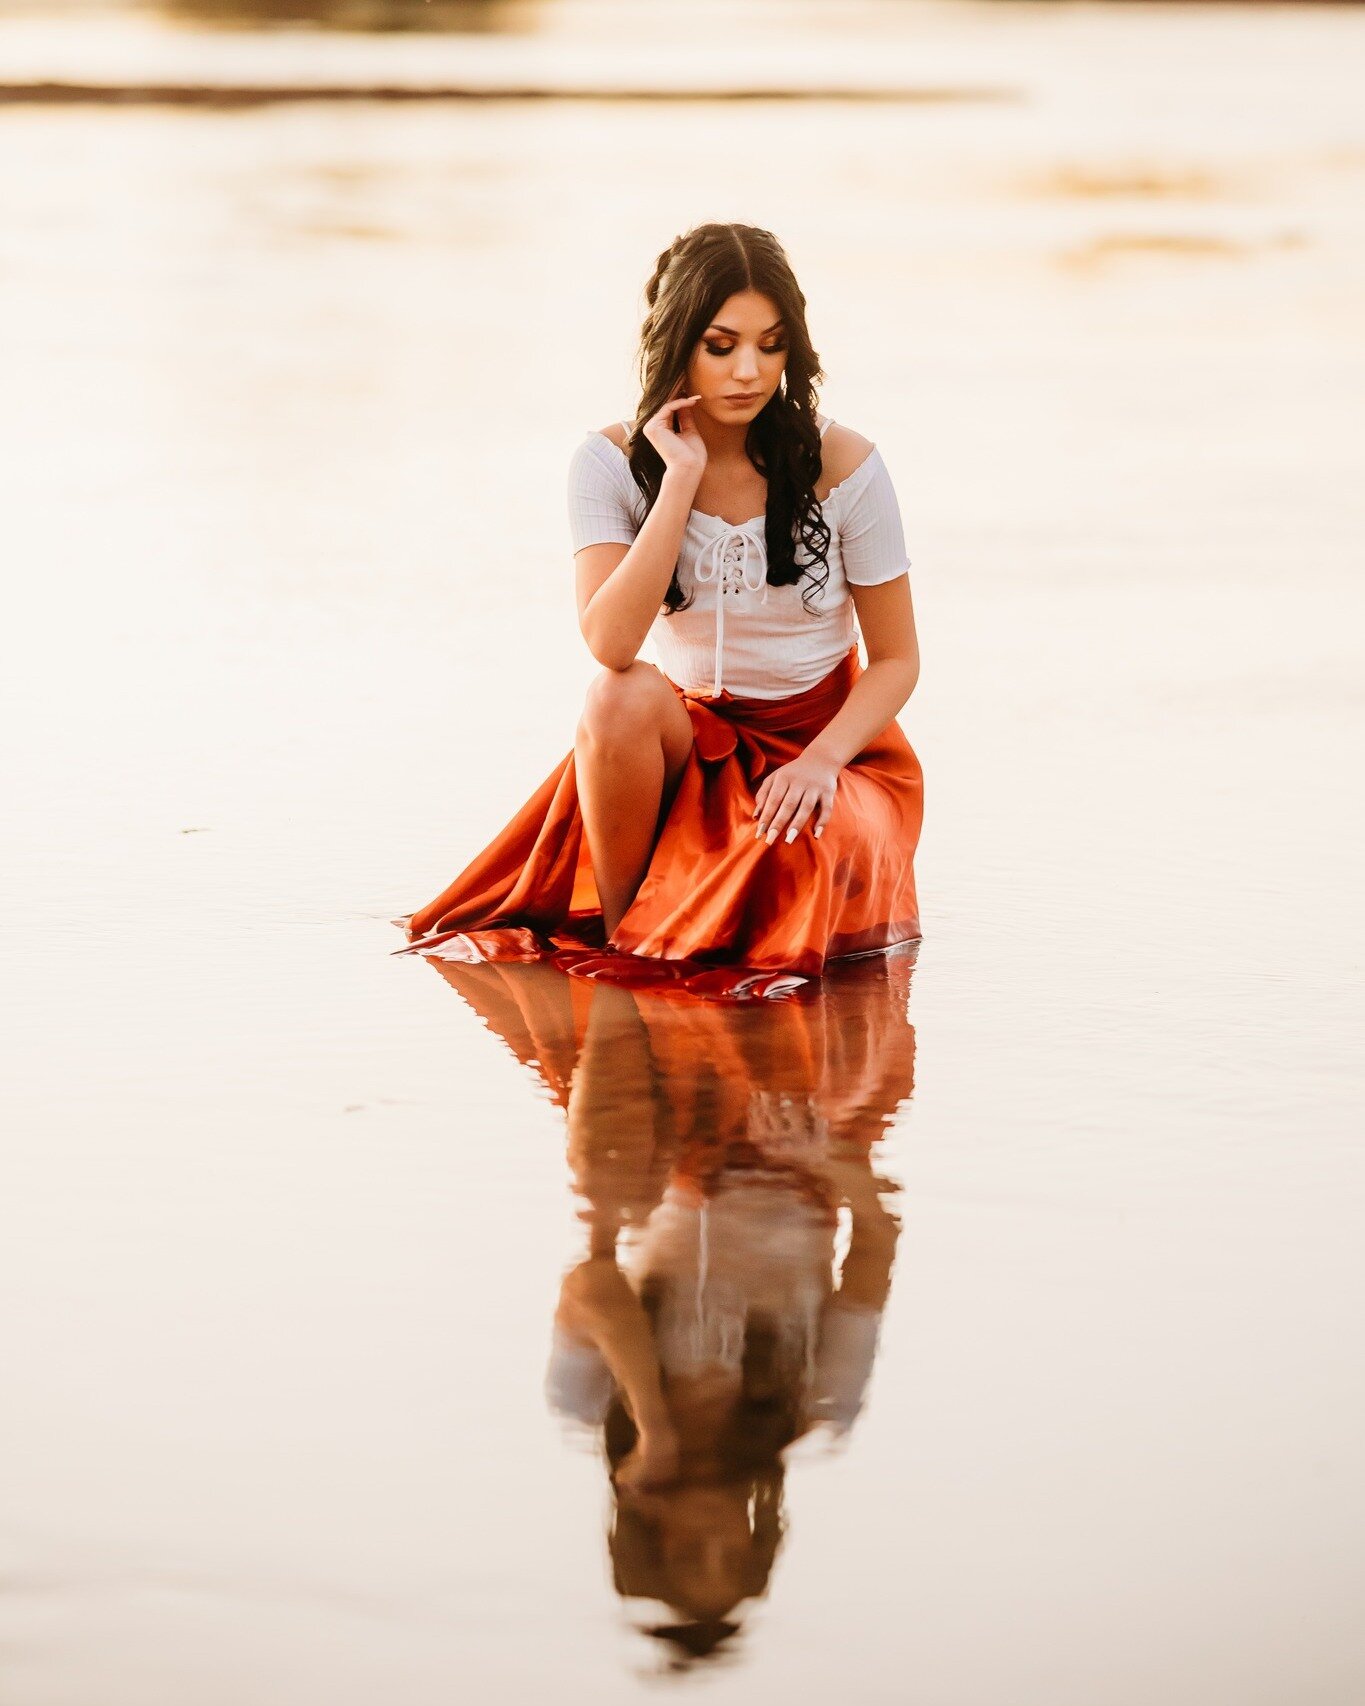 Always see how beautiful you are in your reflection. &lt;3

#wichitaseniorphotographer #wichitasenior #classof2023 #seniorphotography #wichitaphotographer #wichitakansas #kansasphotographer #kansasseniorphotographer